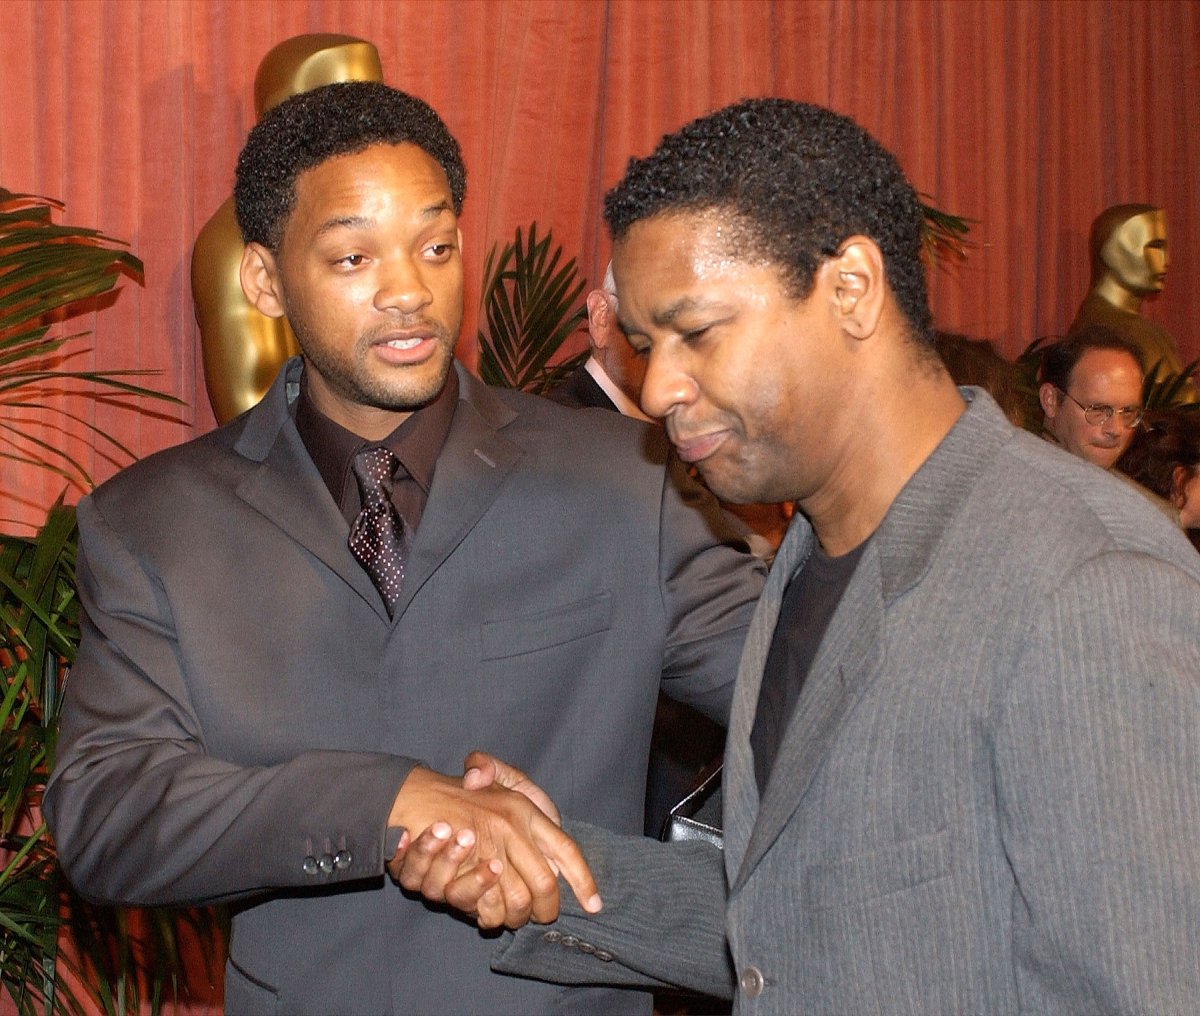 The Real Reason Will Smith Abruptly Left the 2002 Oscars — It Had Nothing to Do With Denzel